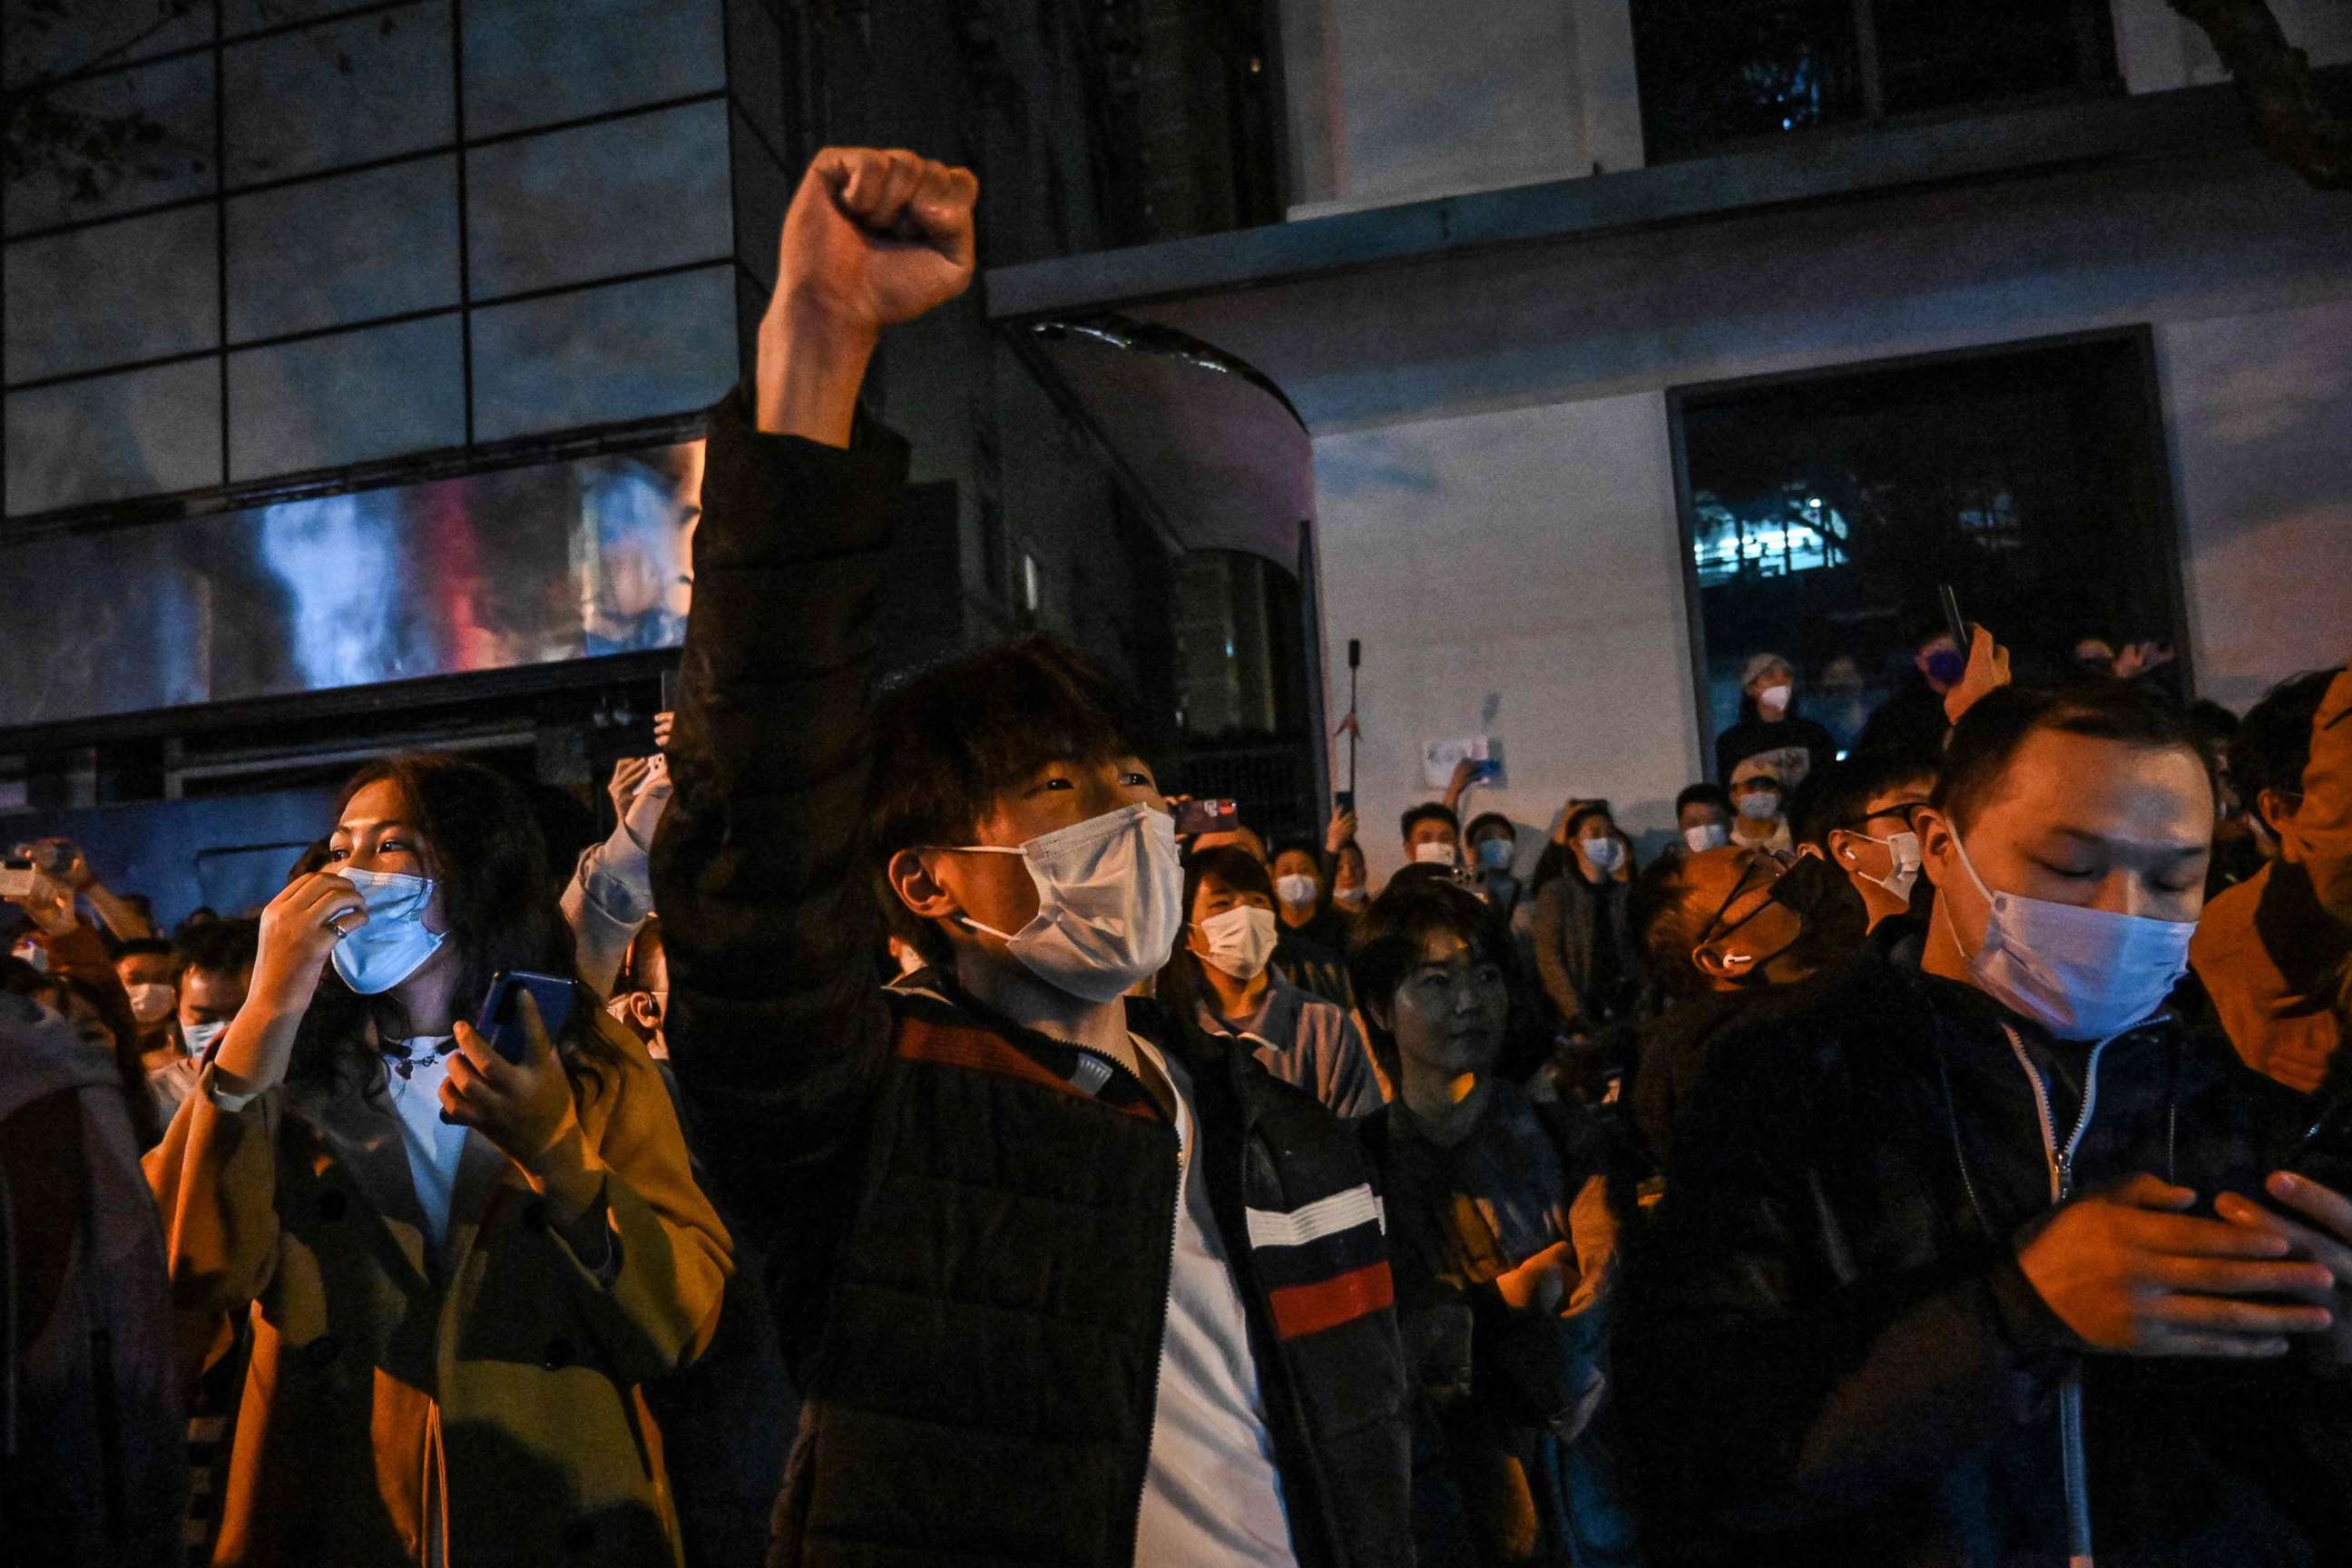 PHOTO: People sing slogans while gathering on a street in Shanghai, Nov. 27, 2022, where protests against China's zero-Covid policy took place the night before following a deadly fire in Urumqi, the capital of the Xinjiang region.